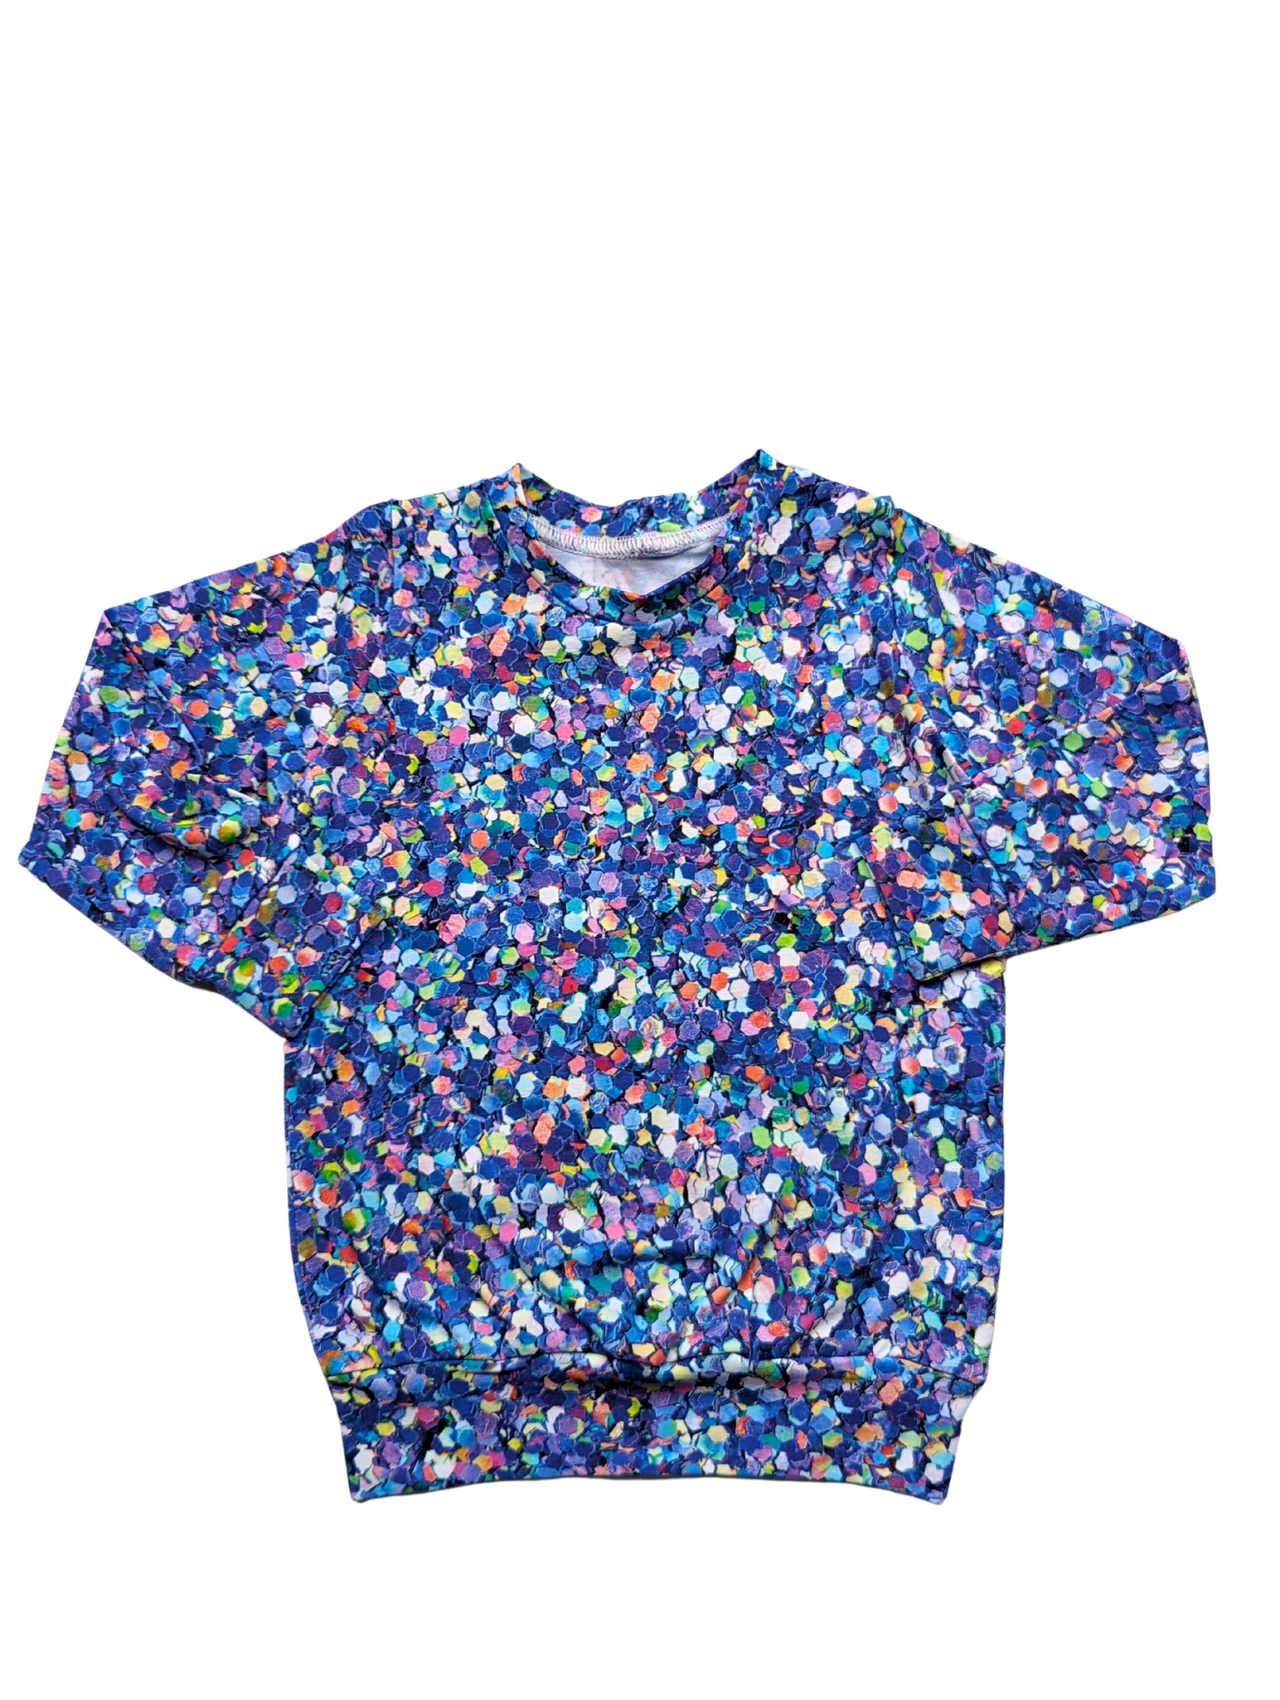 READY TO SHIP //  Glitter - Long Sleeve Top 18-24m